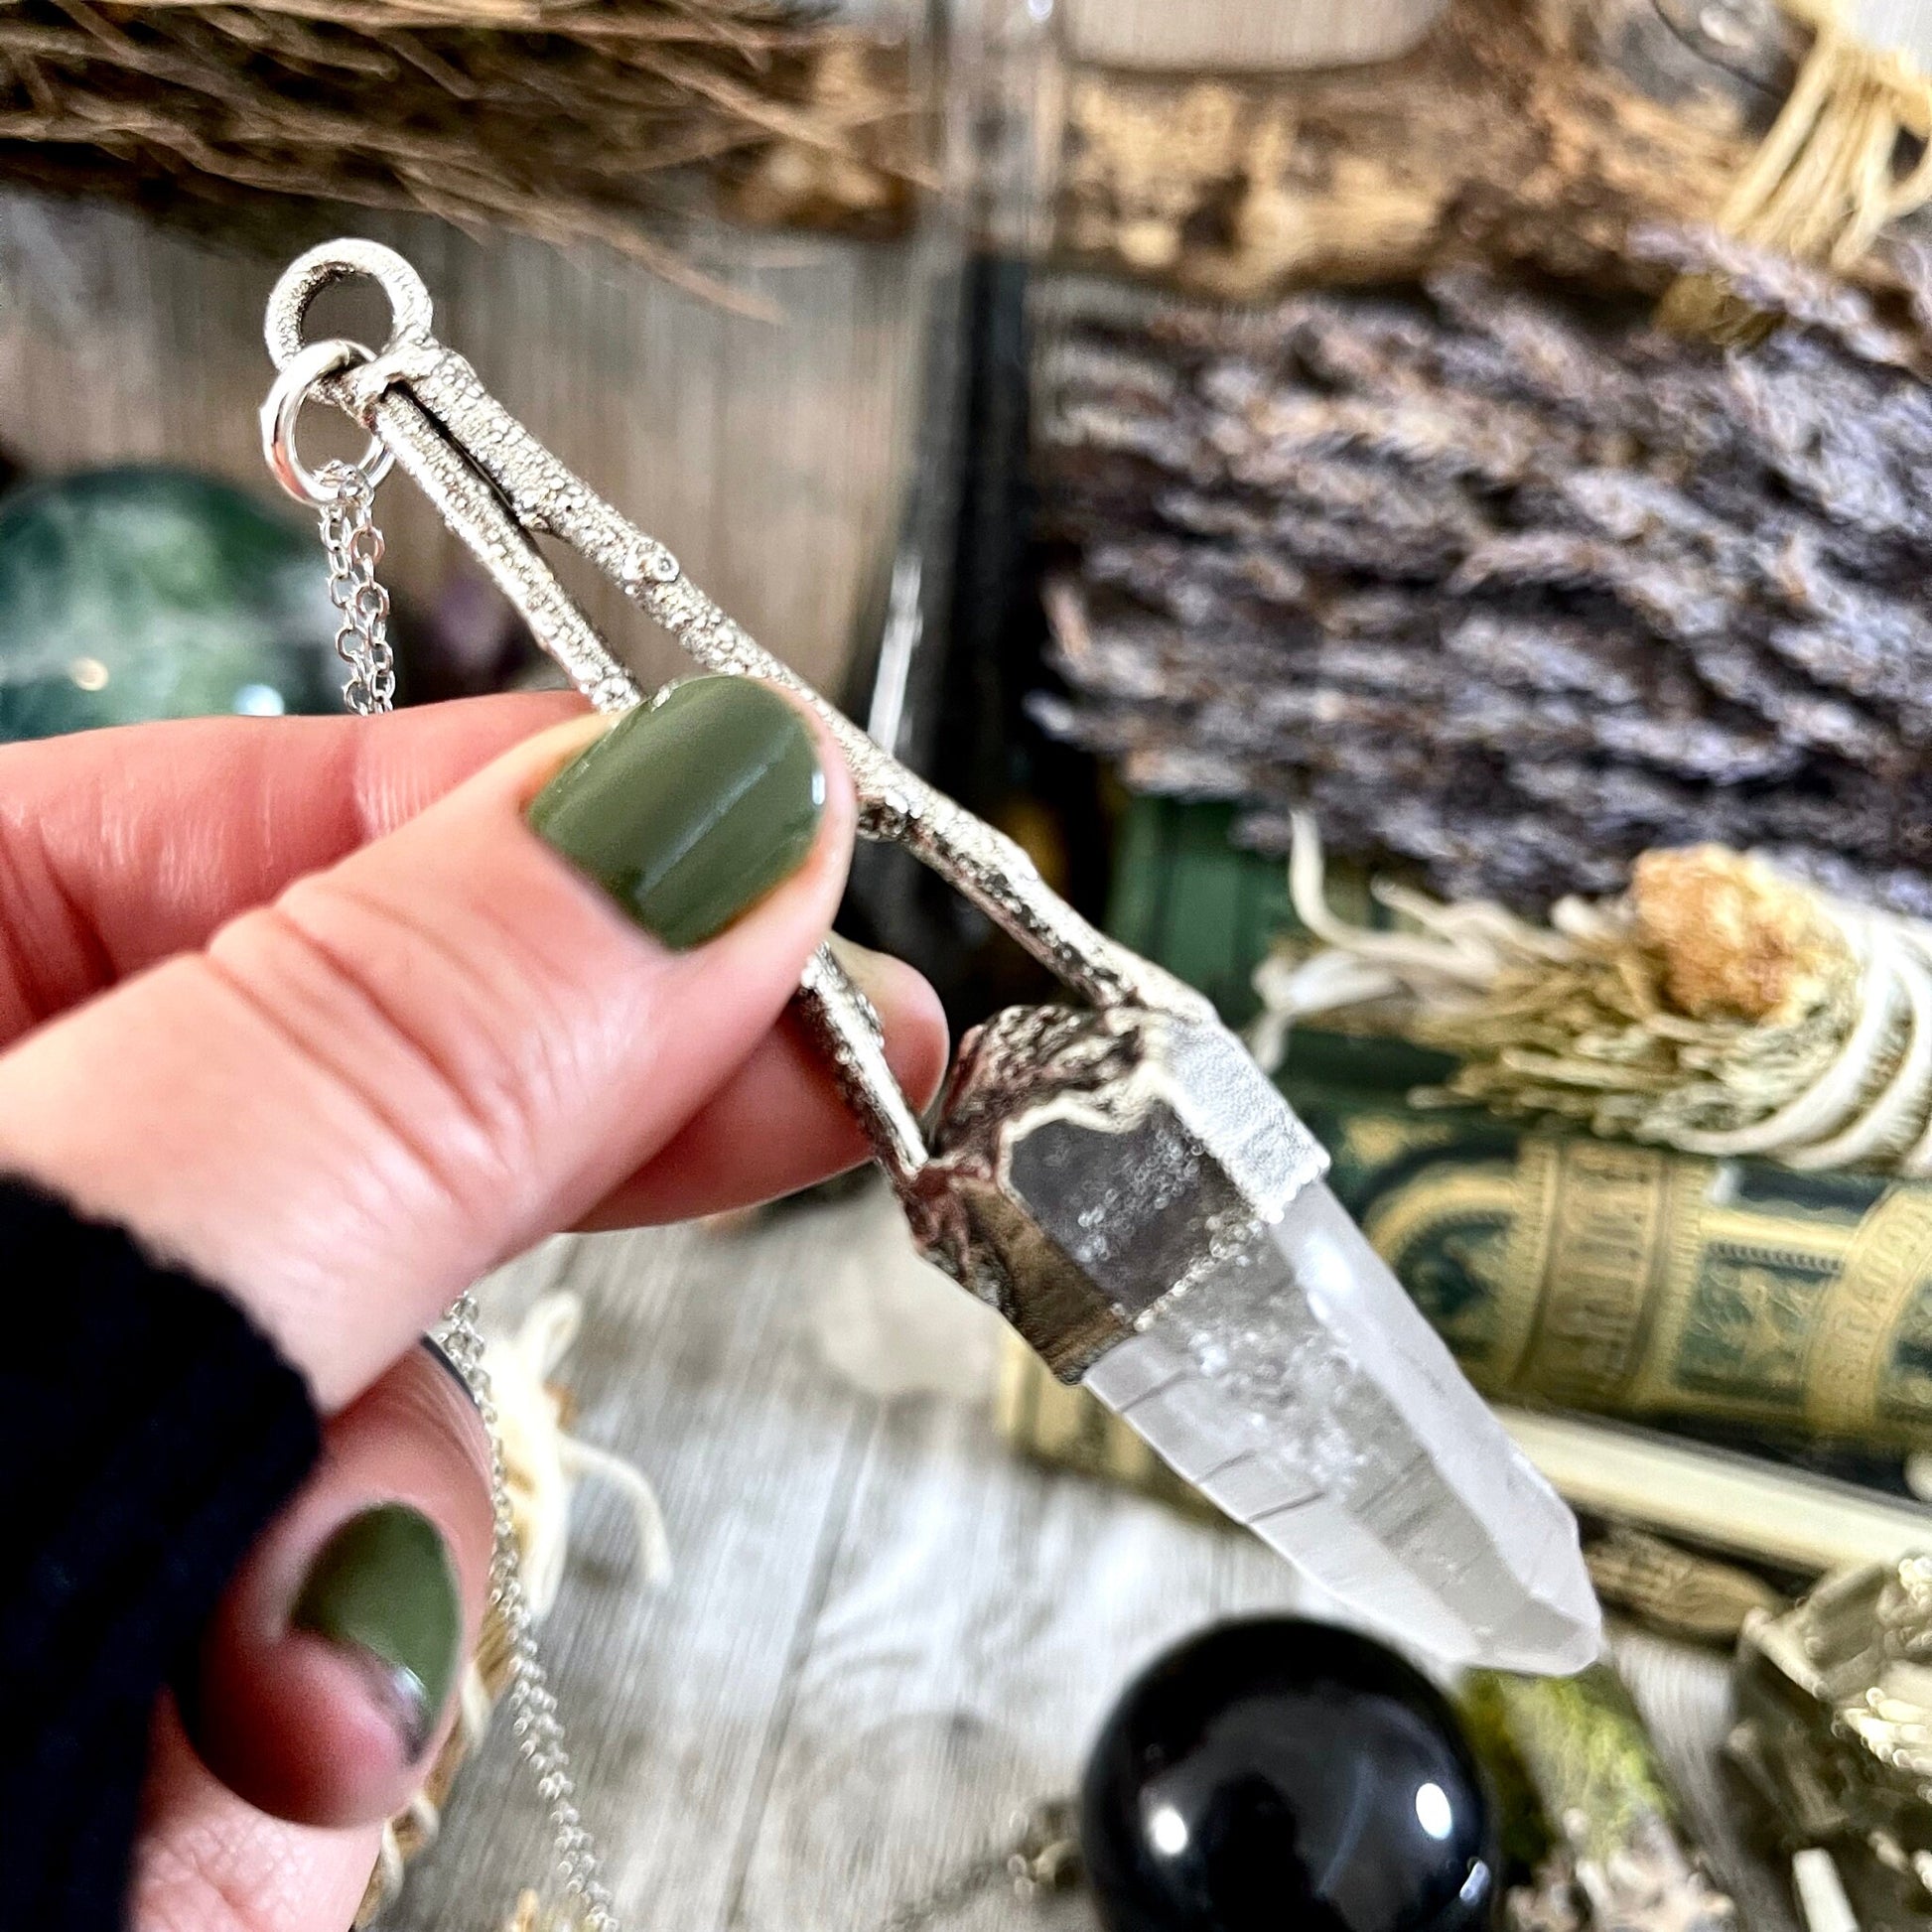 big crystal Necklace, Big Gothic Necklace, Bohemian Jewelry, Crystal Necklaces, Crystal Pendant, Etsy ID: 1650753536, FOXLARK- NECKLACES, Jewelry, nature inspired, Necklaces, Raw clear quartz, Silver Jewelry, Silver Necklace, Silver Stone Jewelry, Stateme